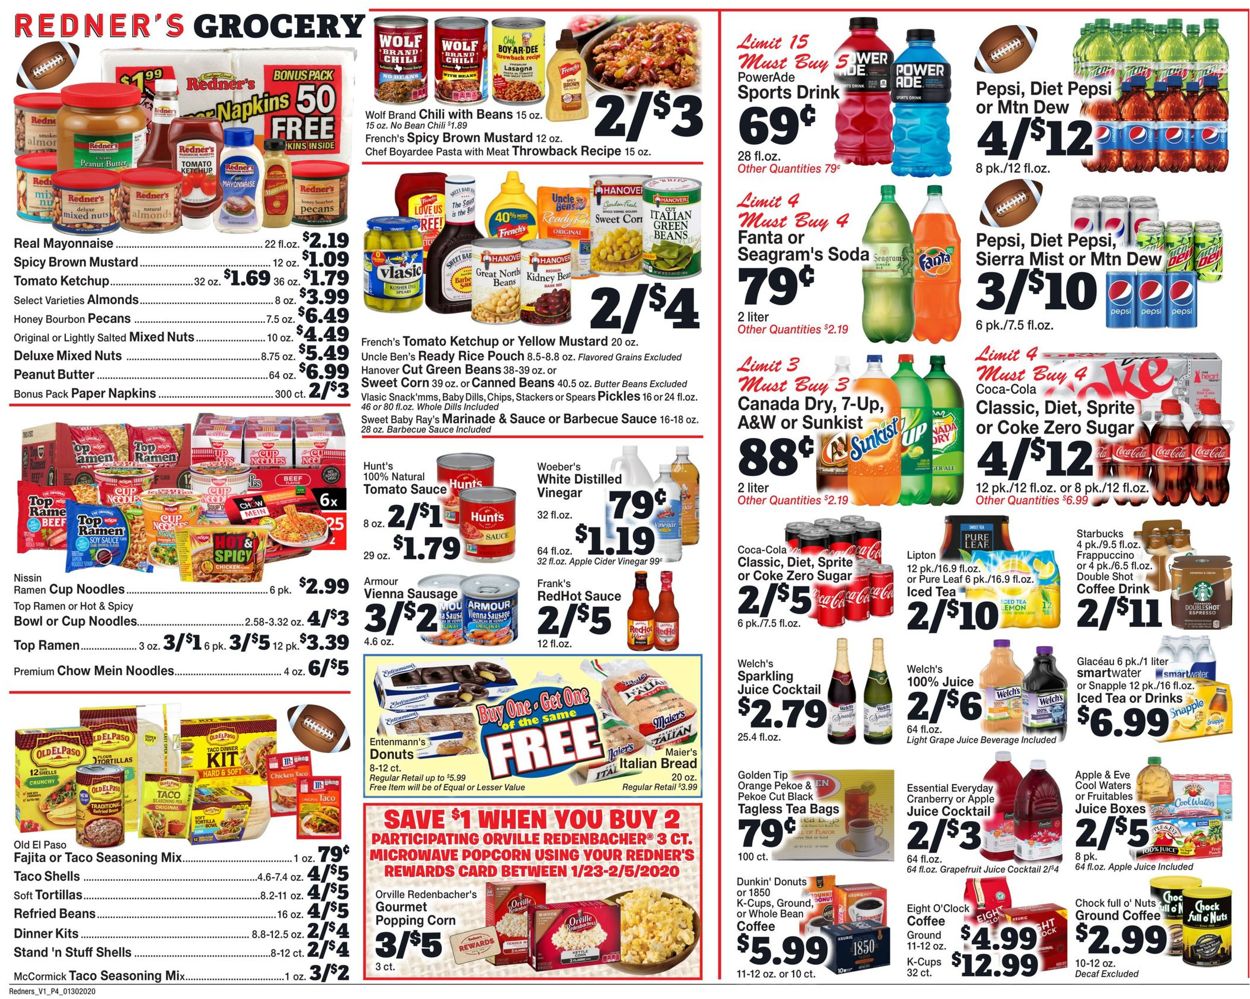 Catalogue Redner’s Warehouse Market from 01/30/2020